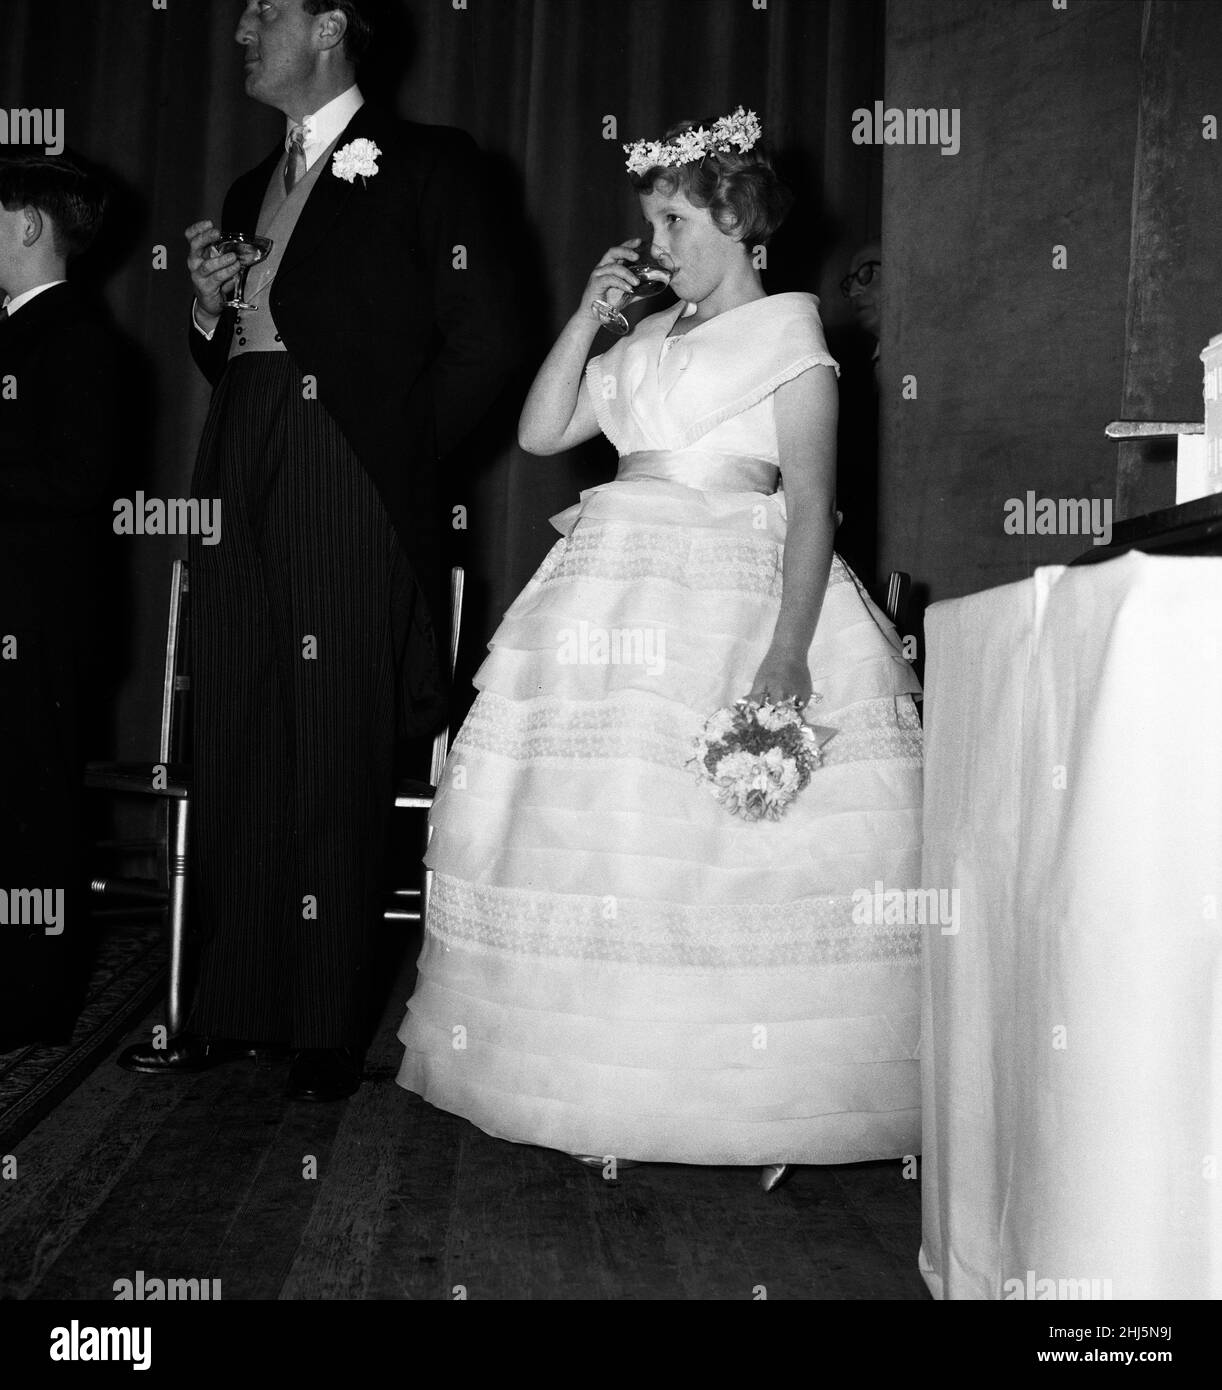 The wedding of Pamela Mountbatten and David Hicks at Romsey Abbey, Hampshire. Princess Anne toasts the couple with non-alcoholic cider. 13th January 1960. Stock Photo